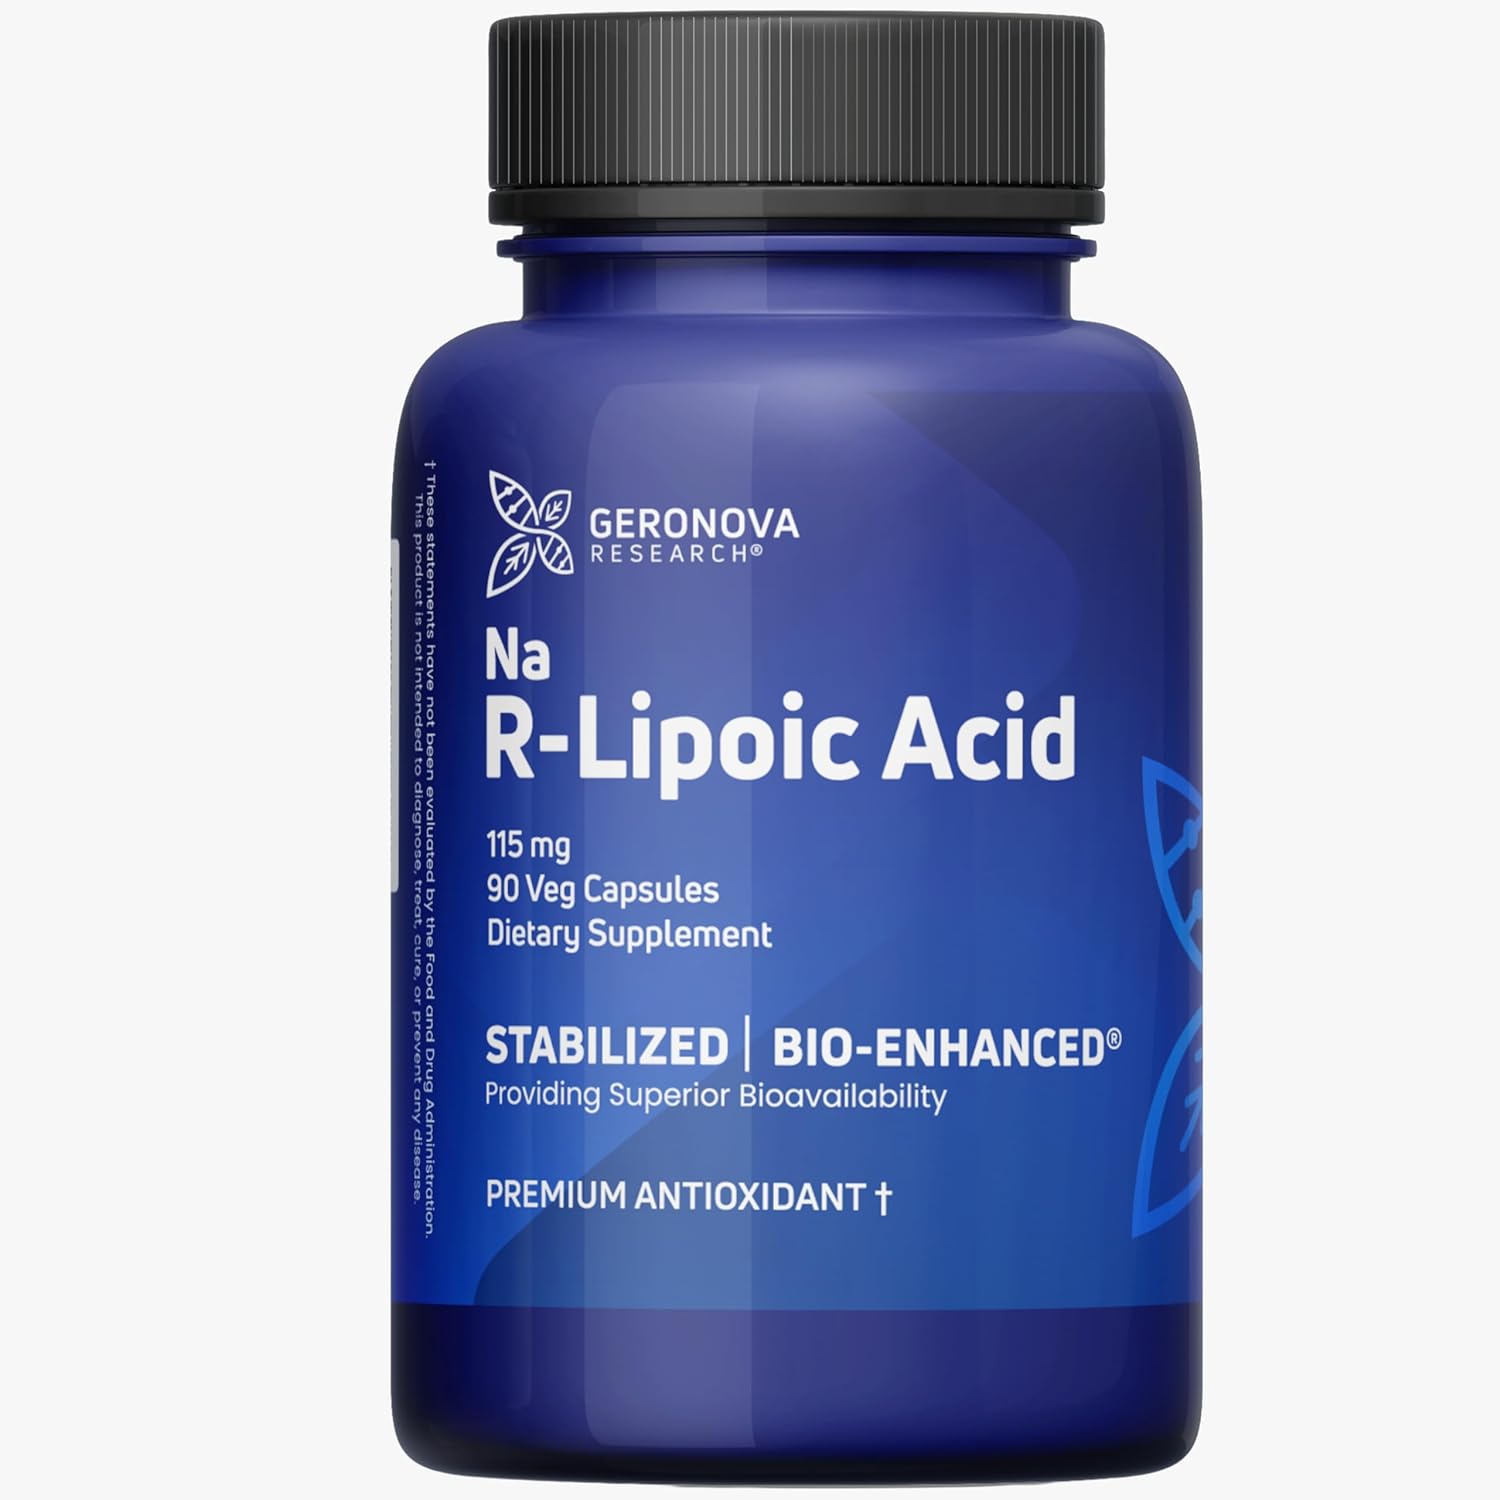 Geronova Research R-Lipoic Acid 115mg 90 Caps - Stabilized R-Alpha Lipoic Acid with Superior Bioavailability, Metabolic Activity & Healthy Aging Support - Gluten Free & Non-GMO Antioxidant Supplement